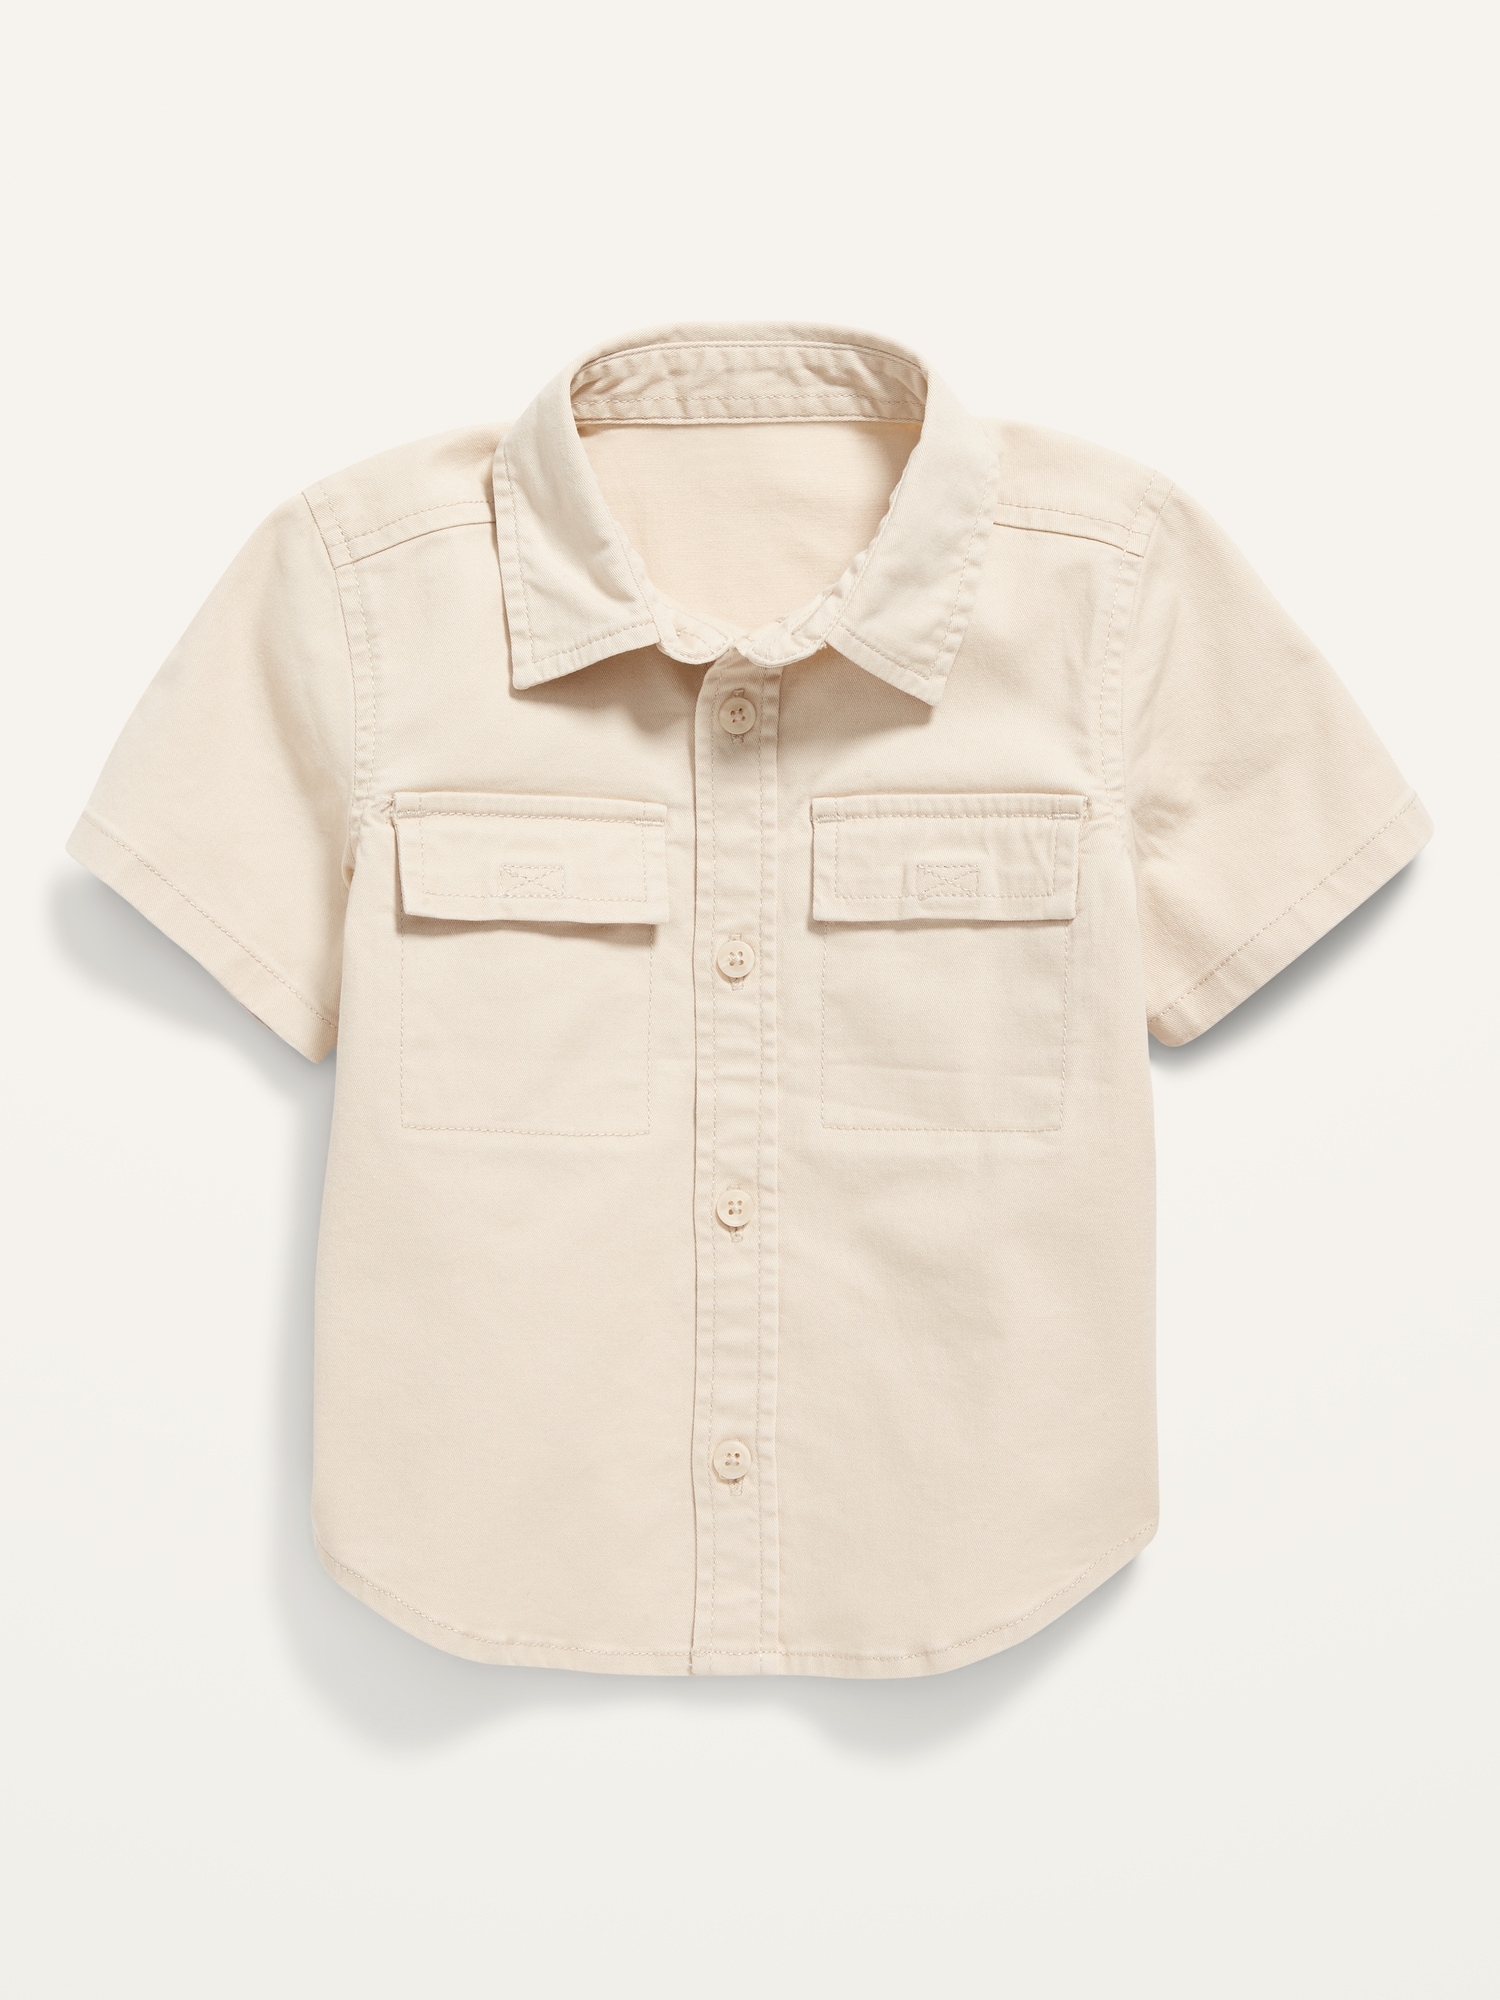 Twill Workwear Short-Sleeve Shirt for Toddler Boys | Old Navy